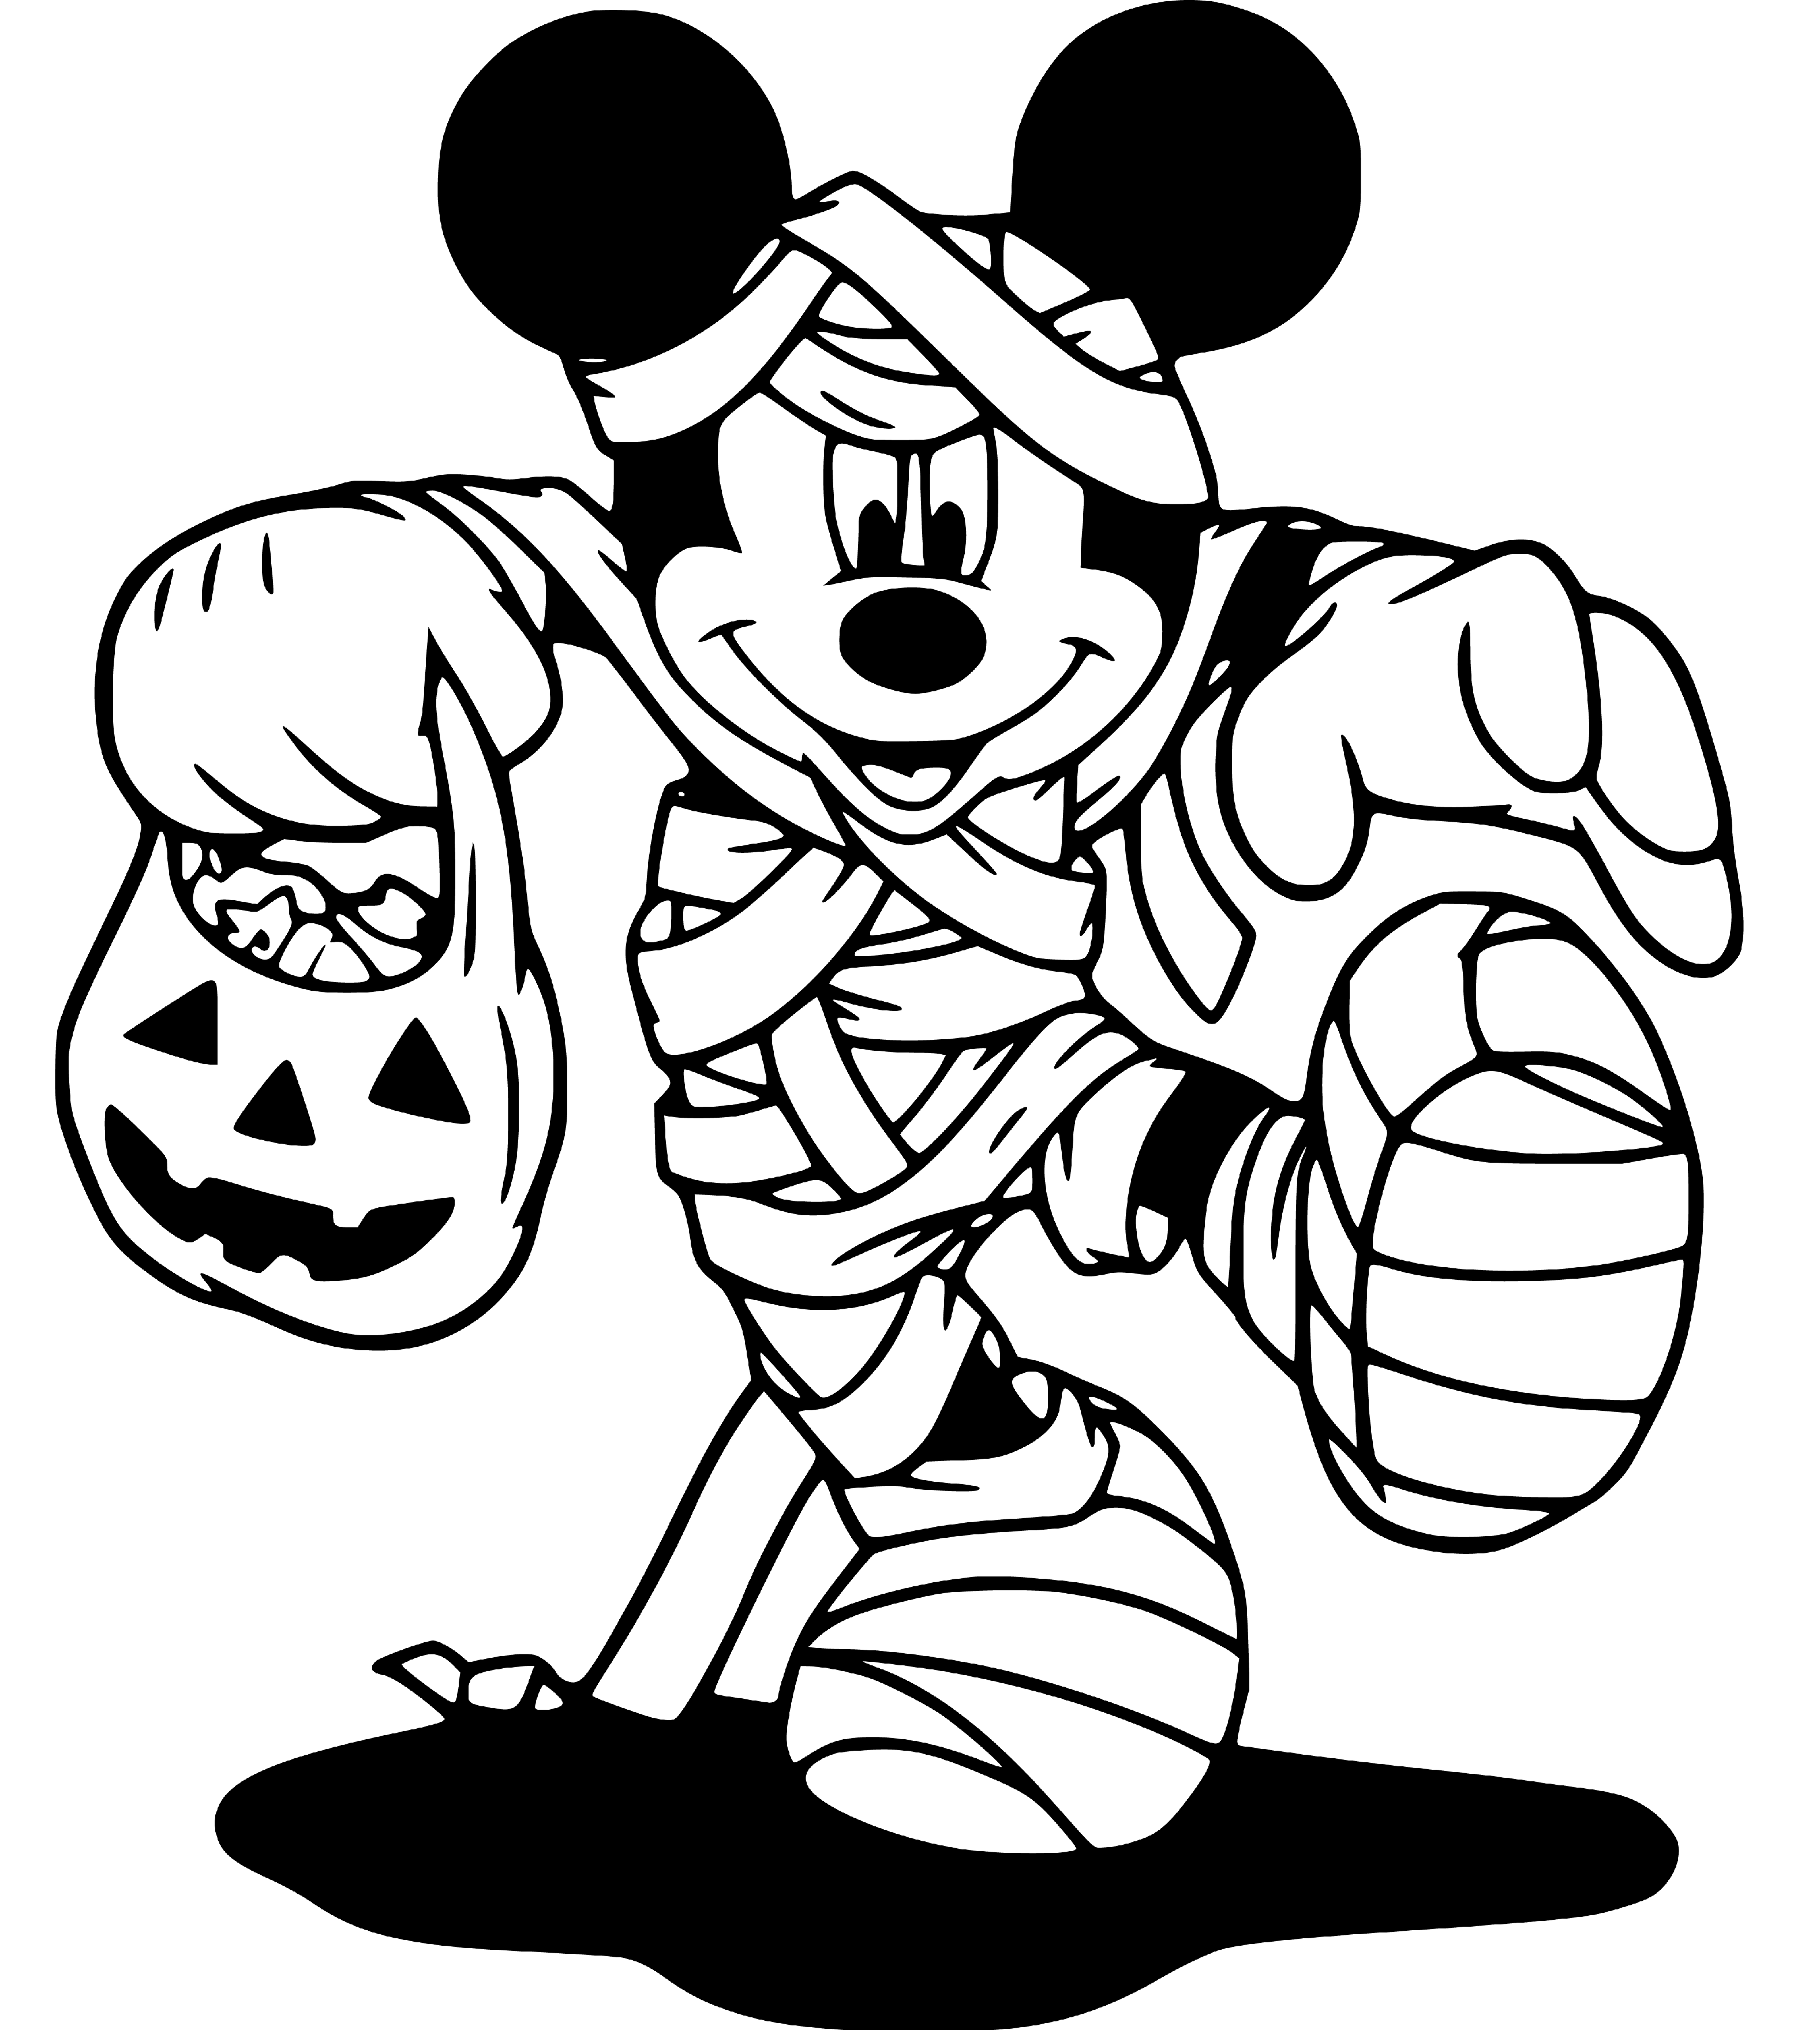 Printable Scary Mickey Mouse Coloring Page for kids.